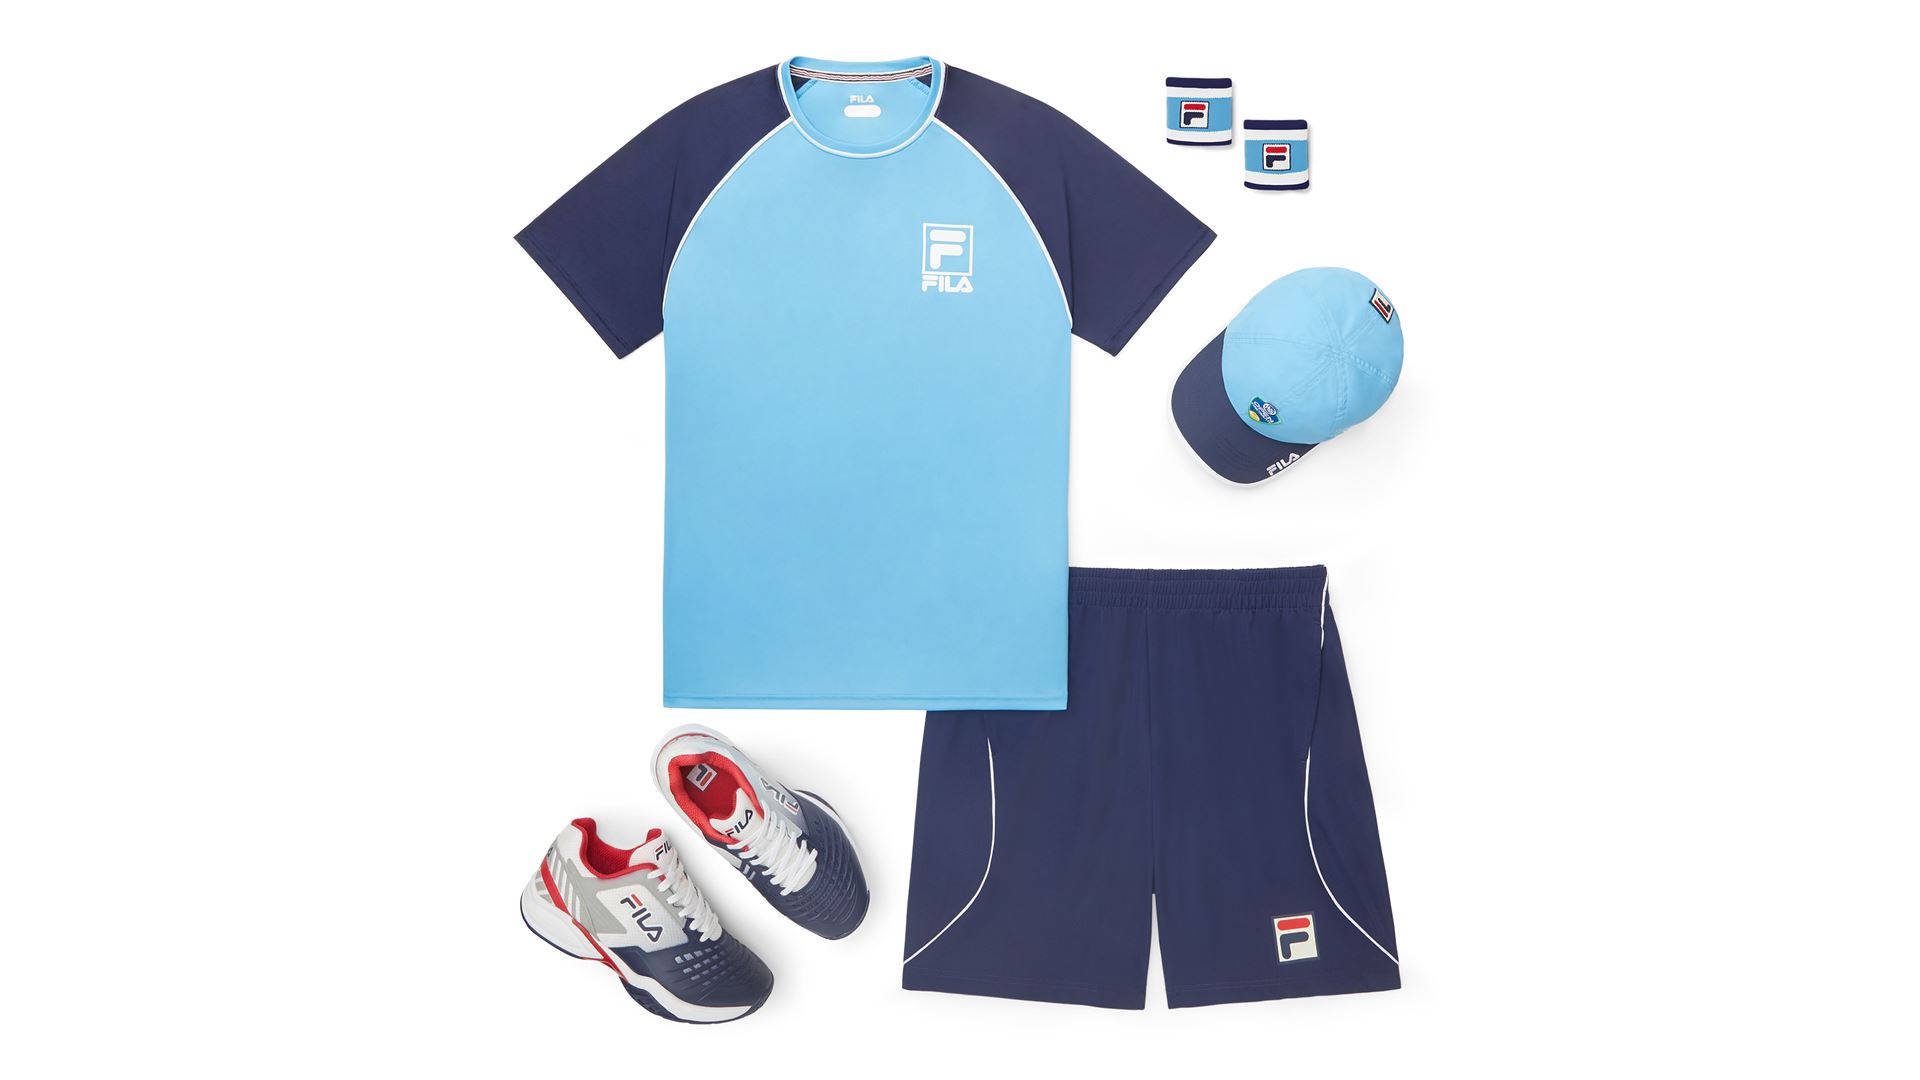 FILA Unveils New Uniform Collection for 2019 Western Southern Open in Cincinnati